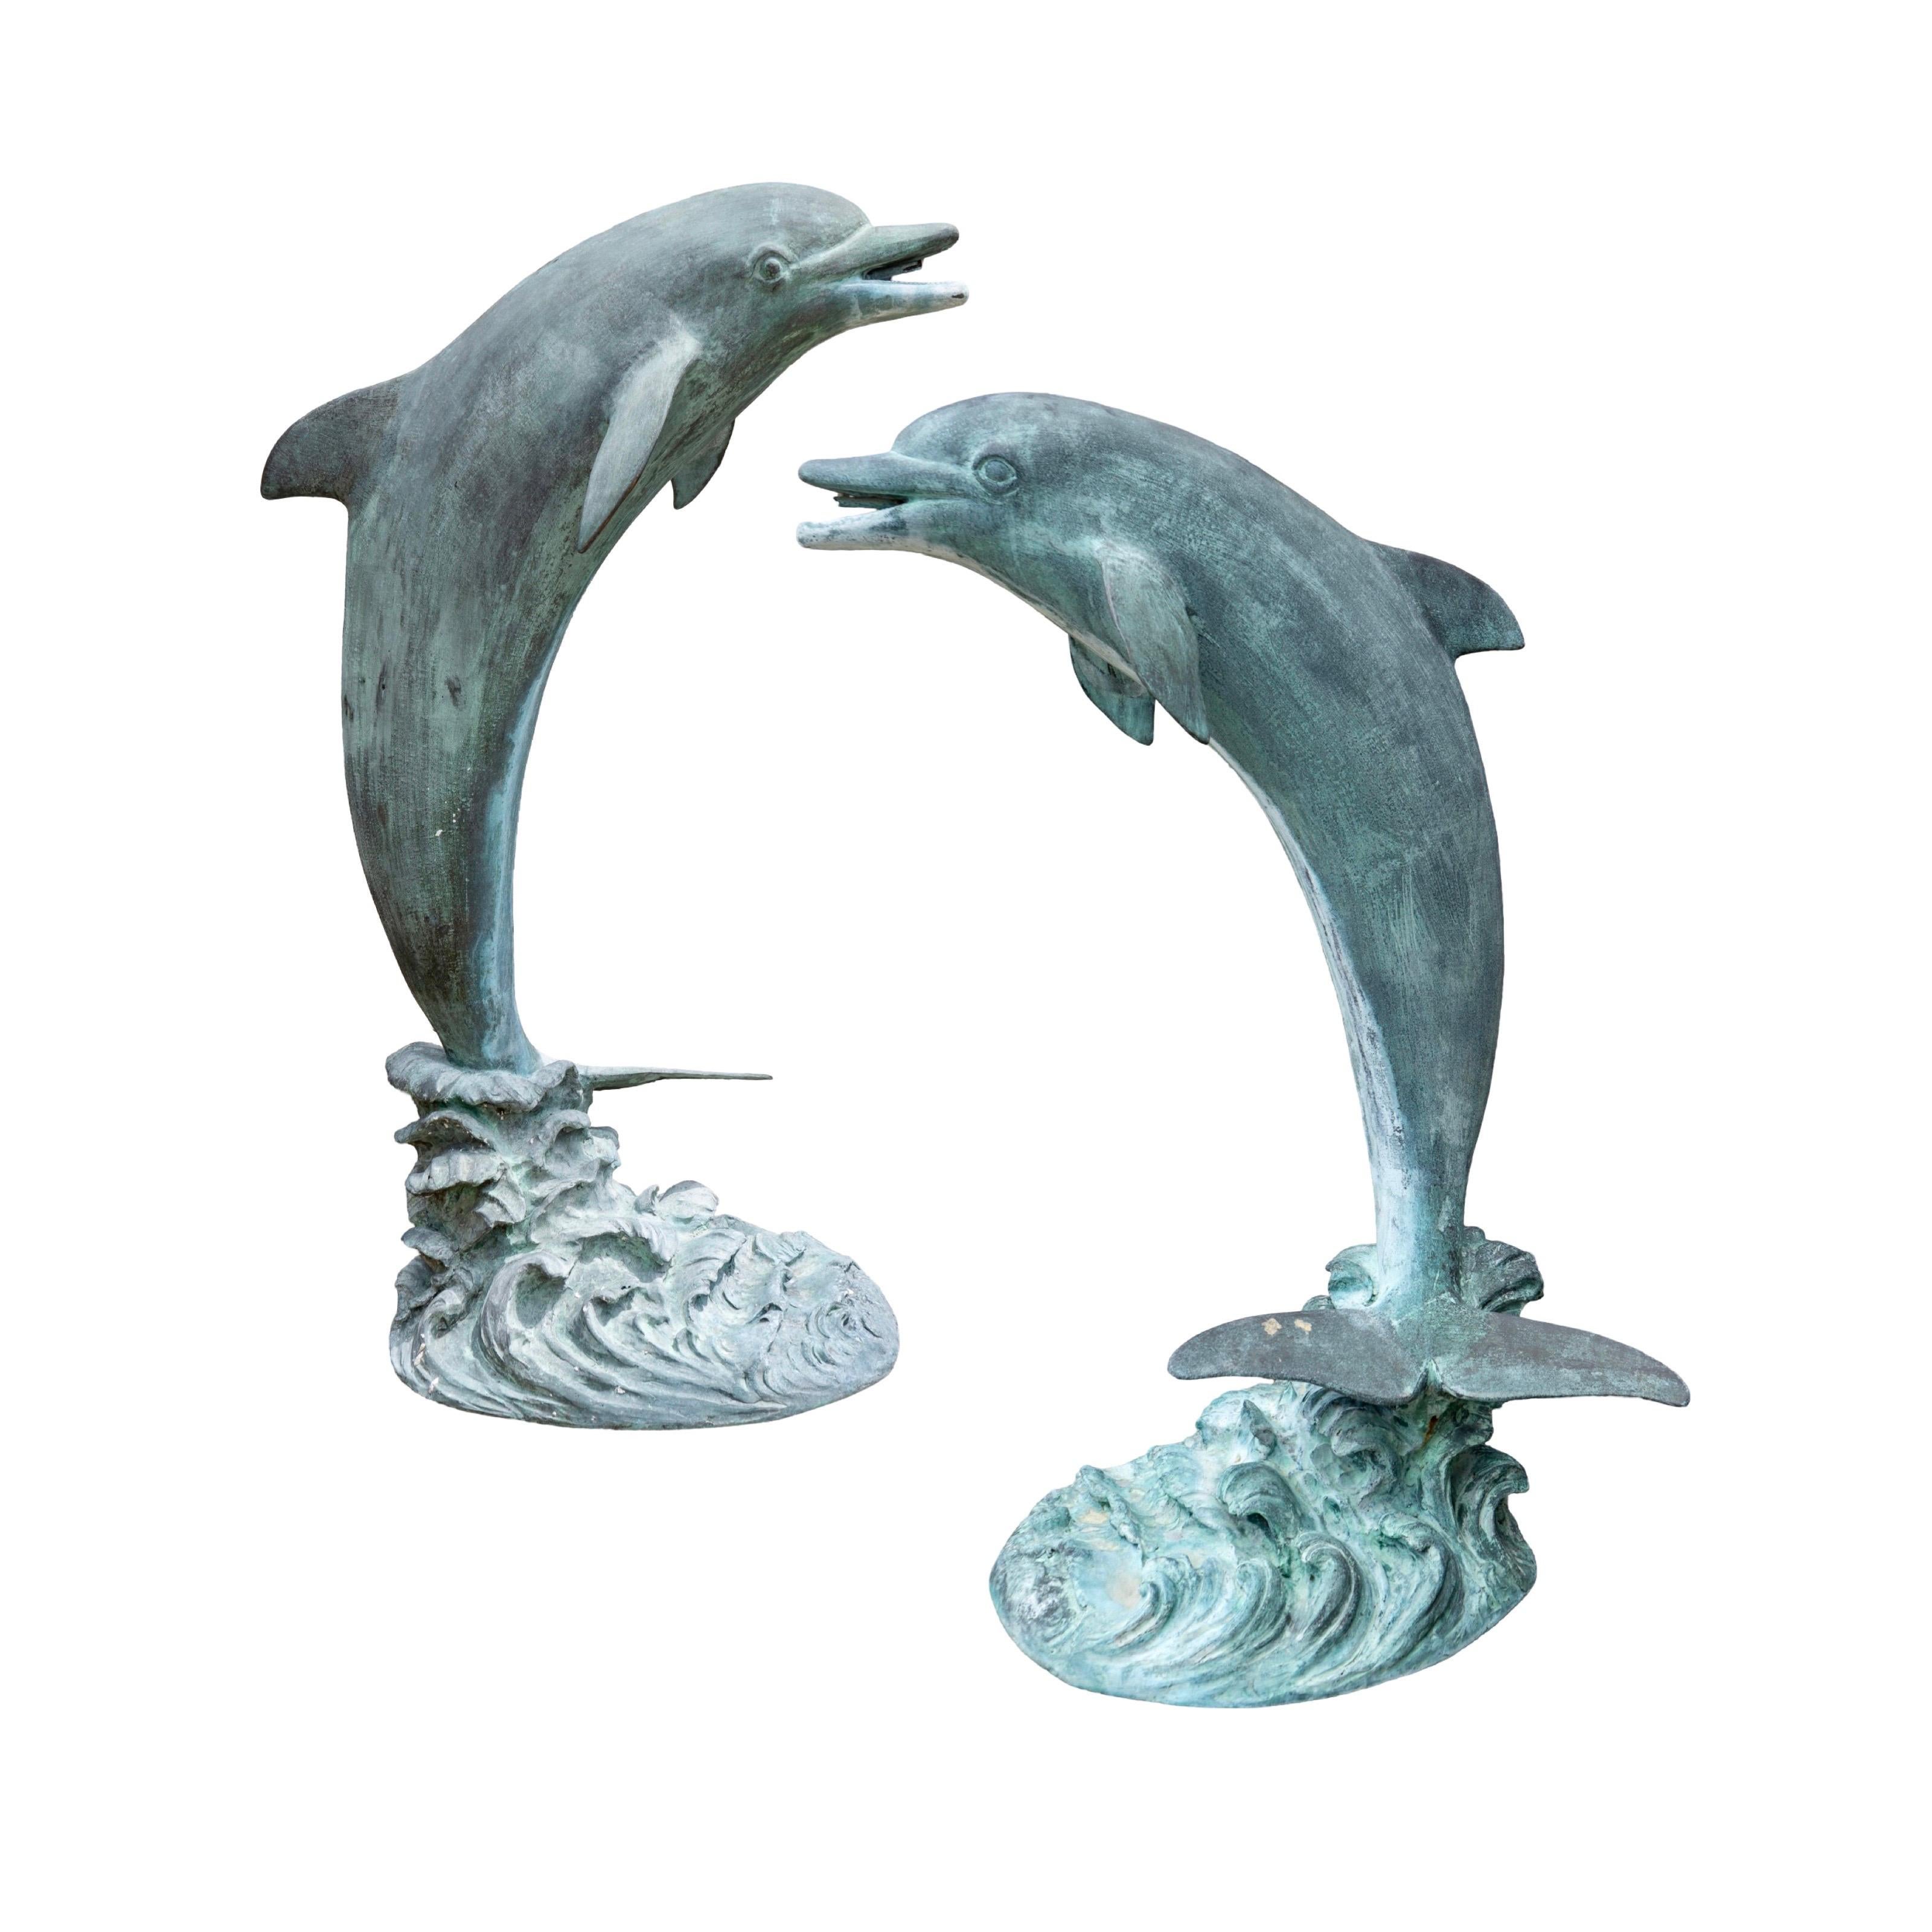 These French Bronze Dolphin Fountains are stunning sculptures from the 1990s. Made in France, each sculpture features an open-mouthed spout for water exiting to make an elegant fountain. Crafted with bronze and an antique finish, these fountains are